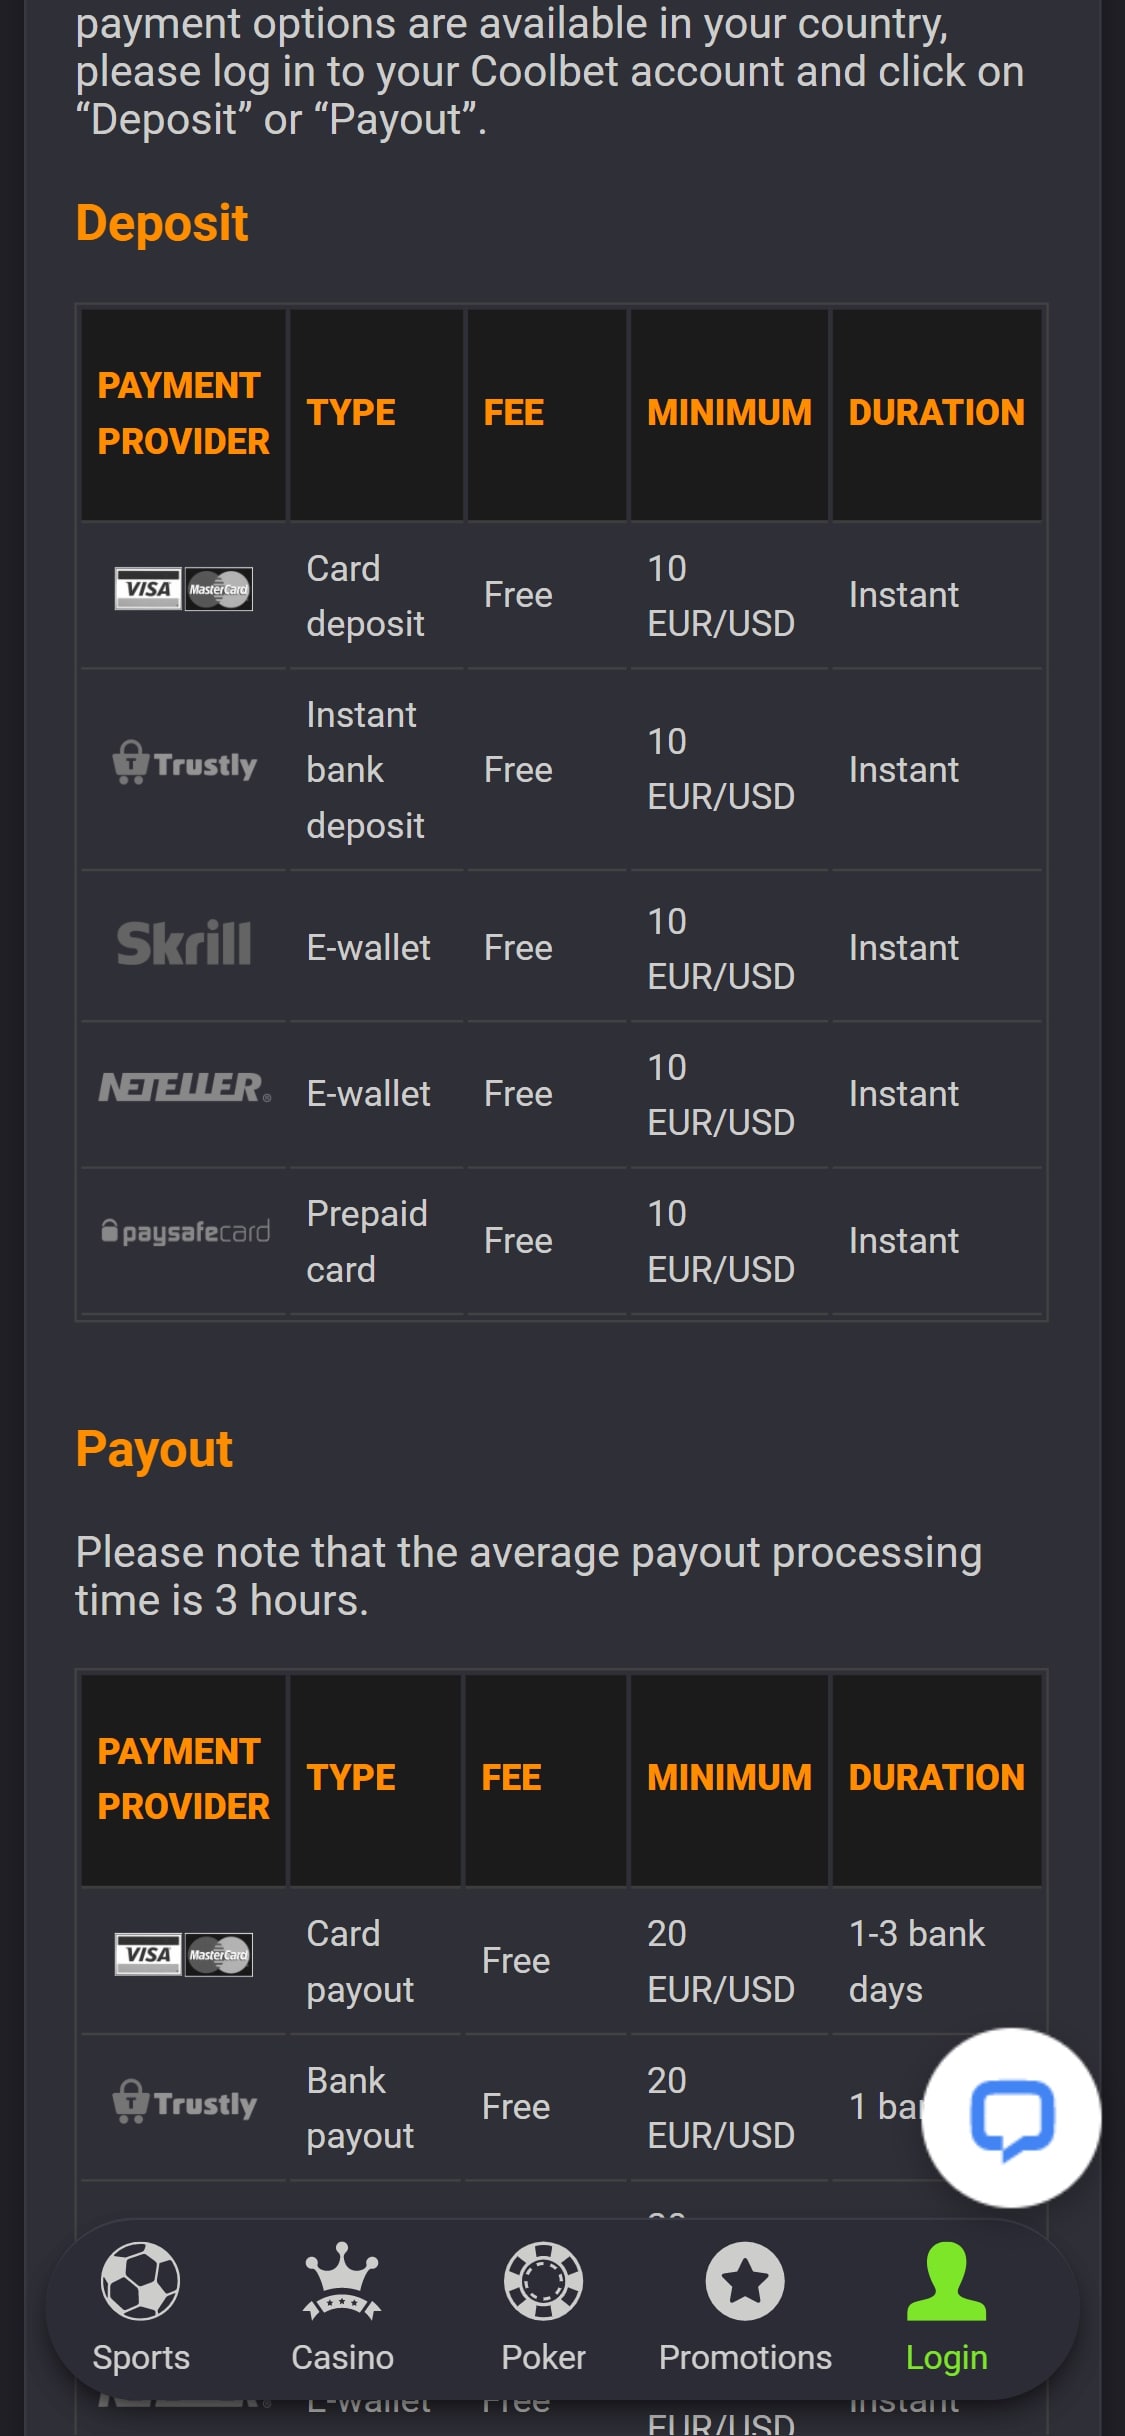 Coolbet Mobile Payment Methods Review